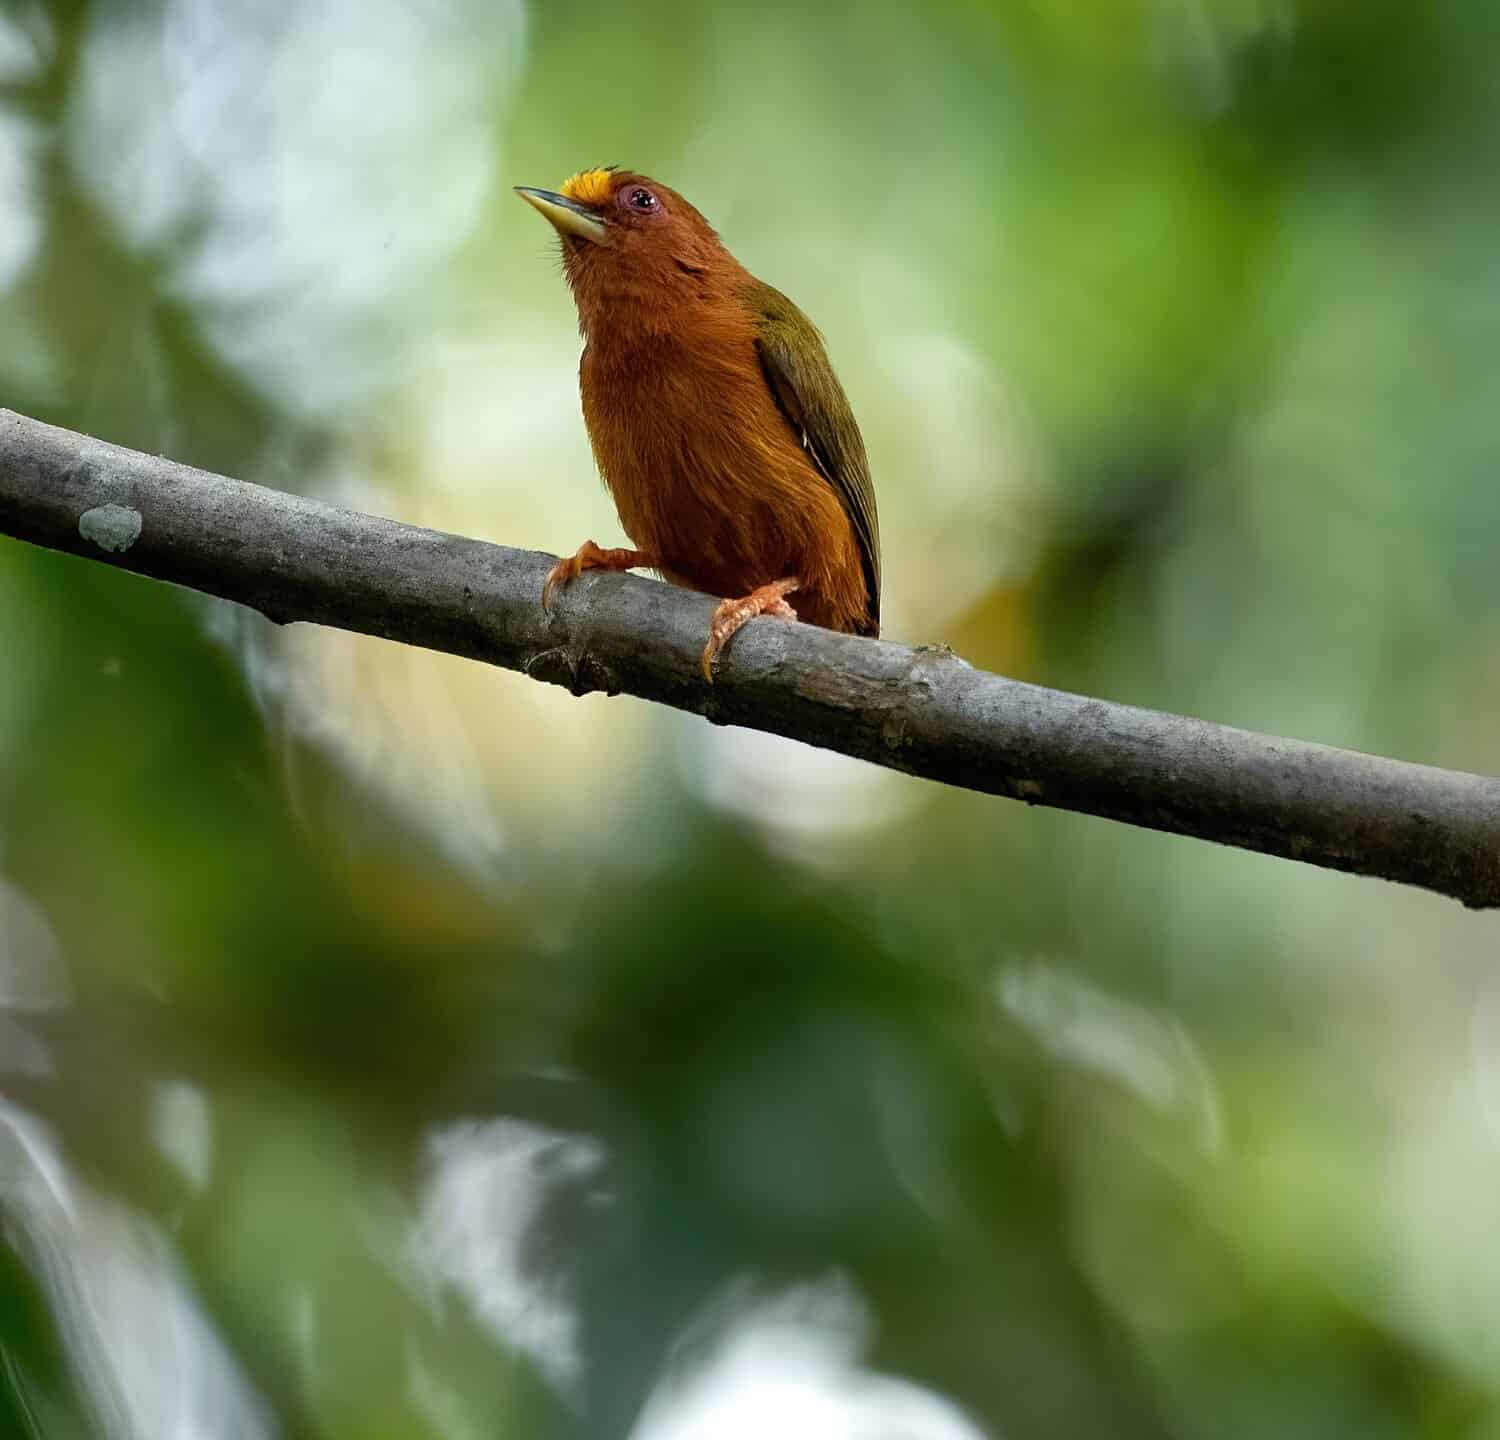 The rufous piculet is an active bird moving singly or in small groups through the lowest storeys of the forest, usually not above 5 m (16 ft) from the ground.